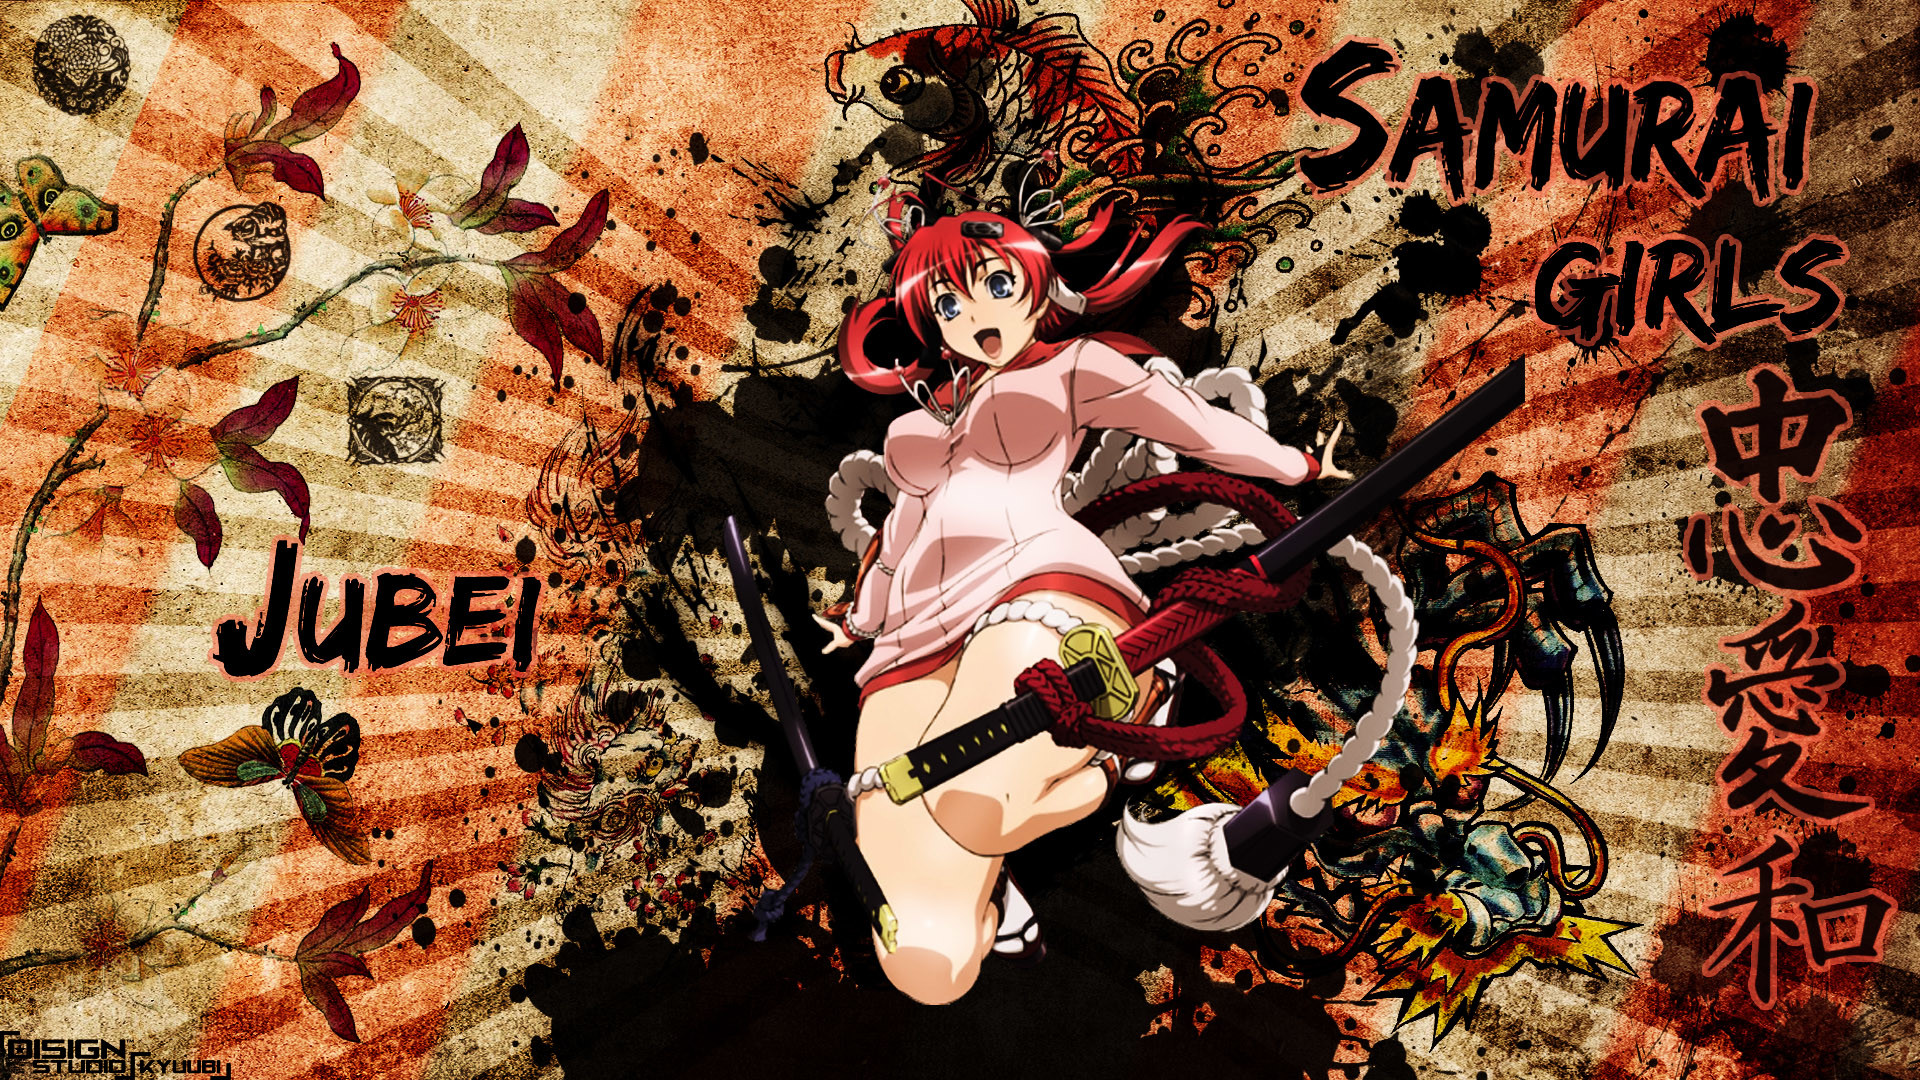 Artist : Action Anime wallpapers by various designers.